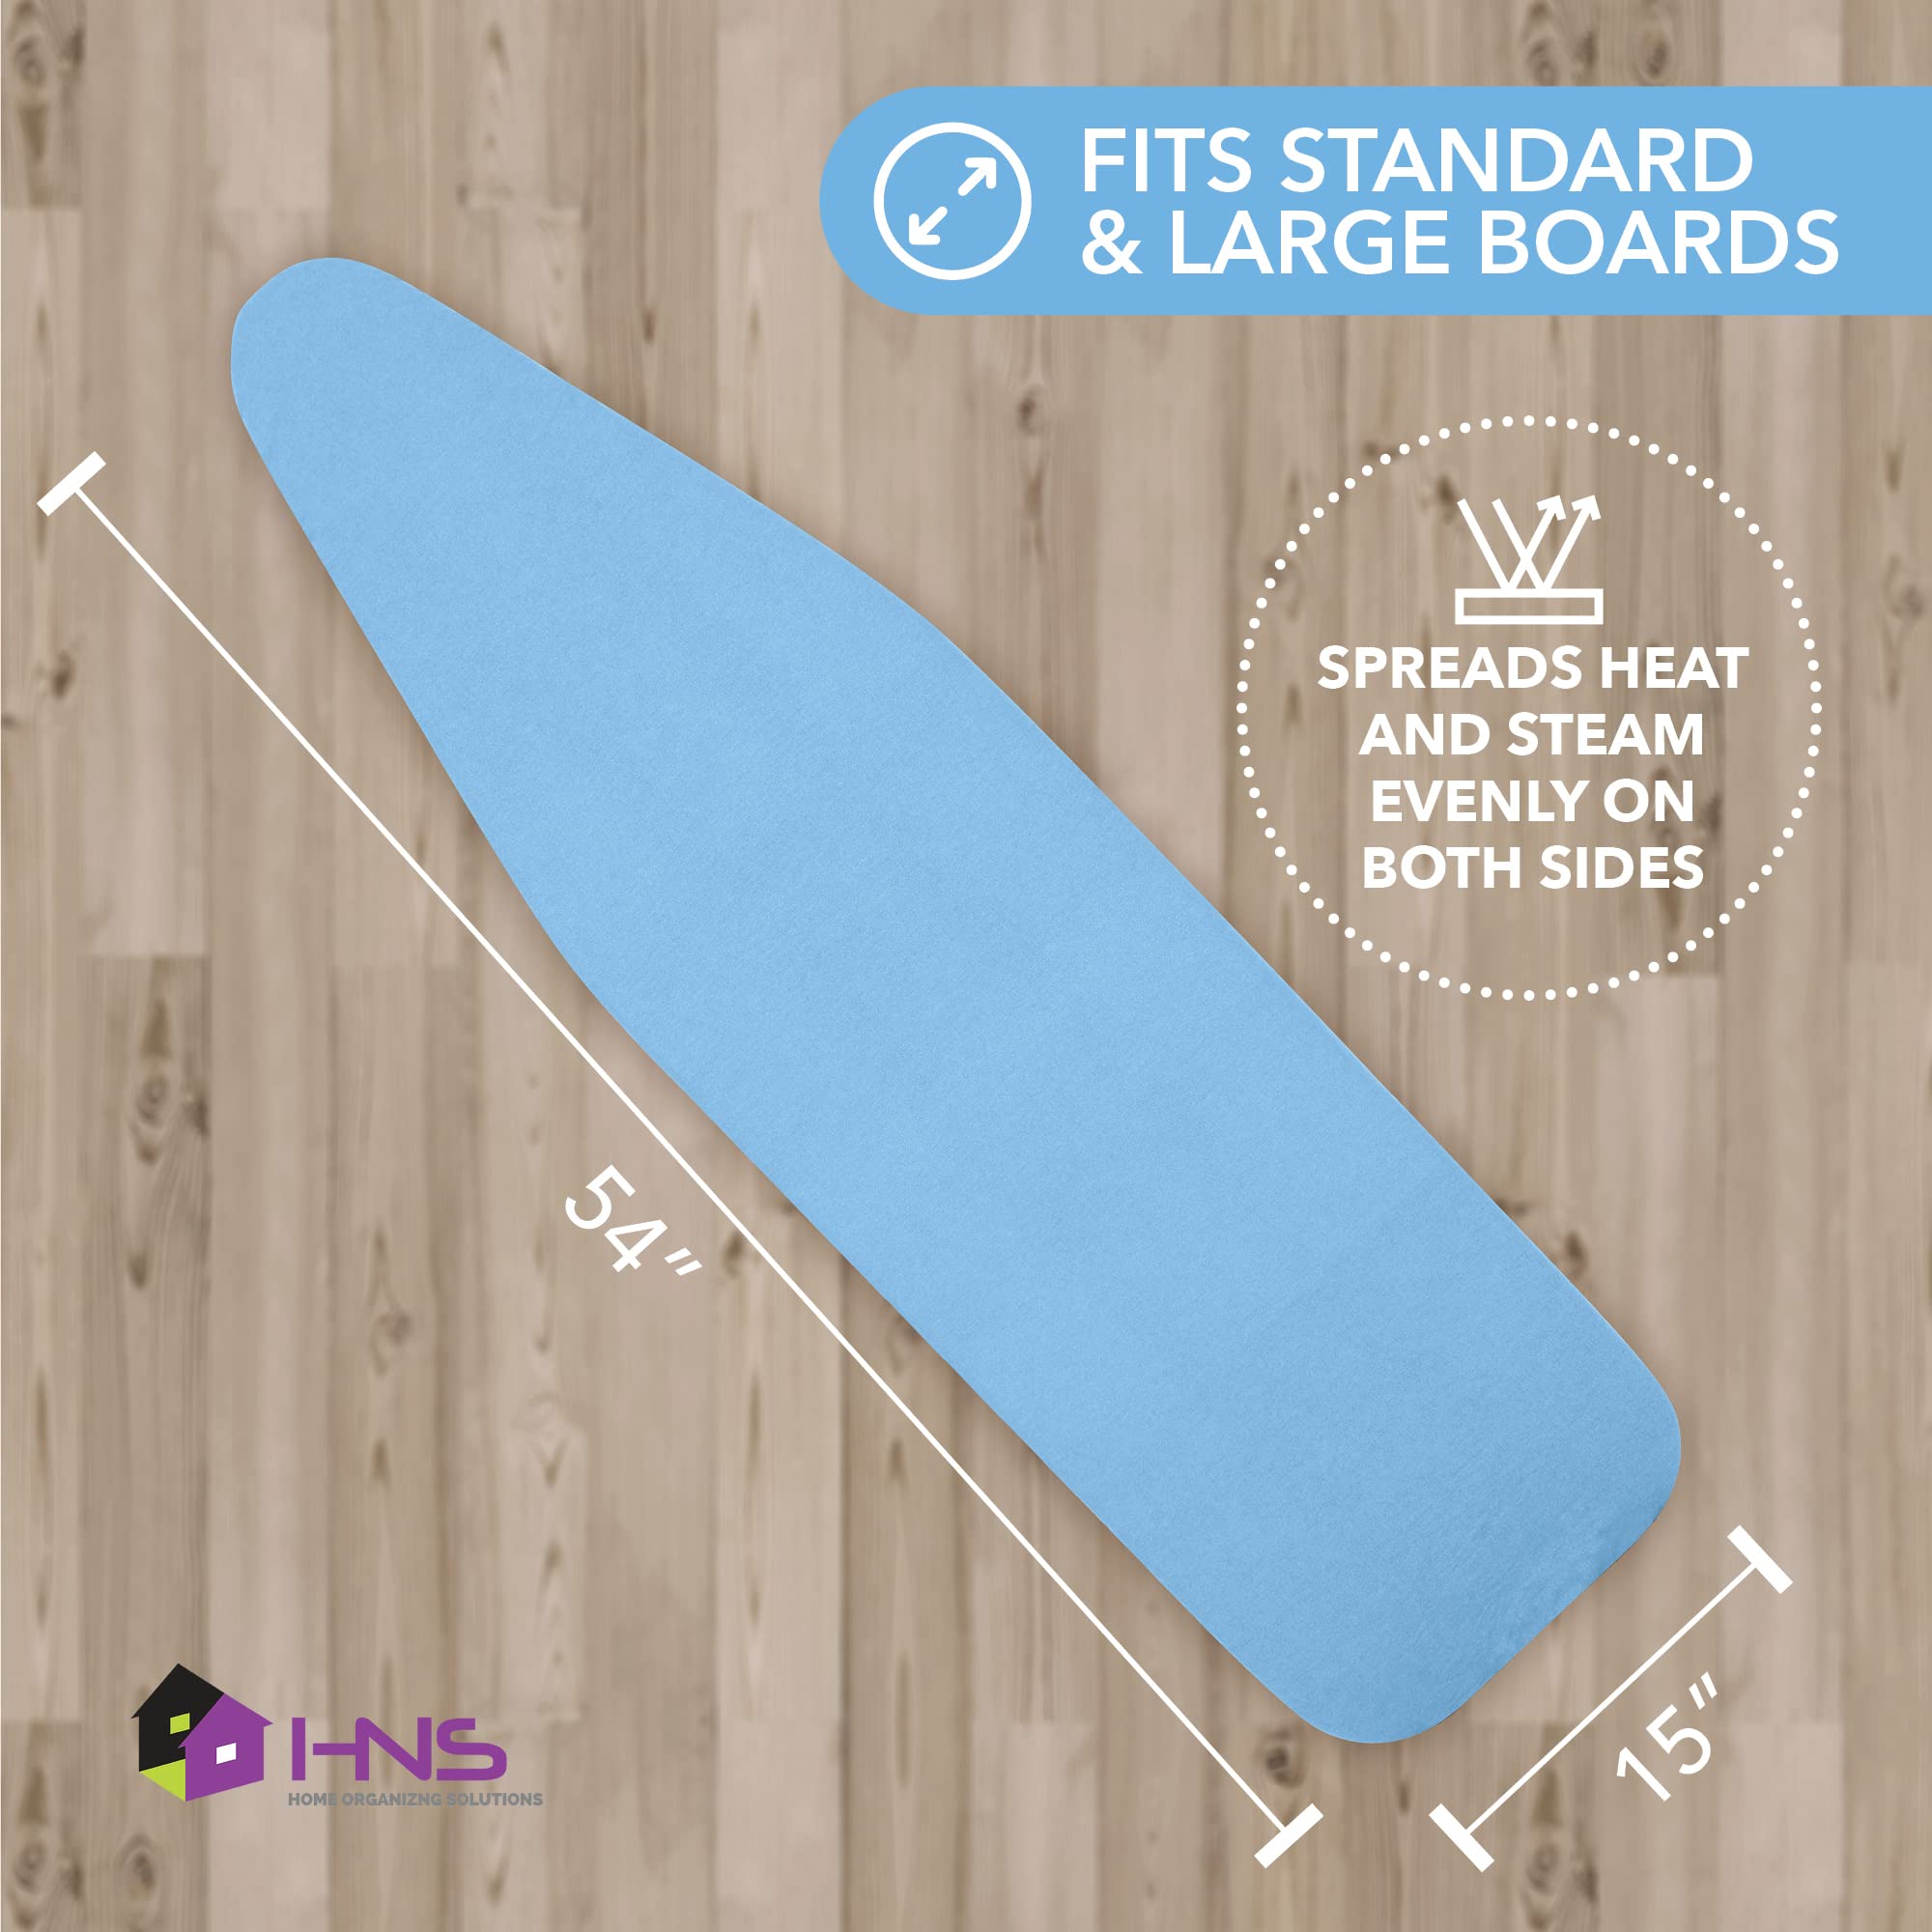 HOLDN’ STORAGE Iron Board Cover with Padding - Ironing Board Cover and Pad 15" x 54" - Large Iron Board Cover - Iron Pad for Table Top